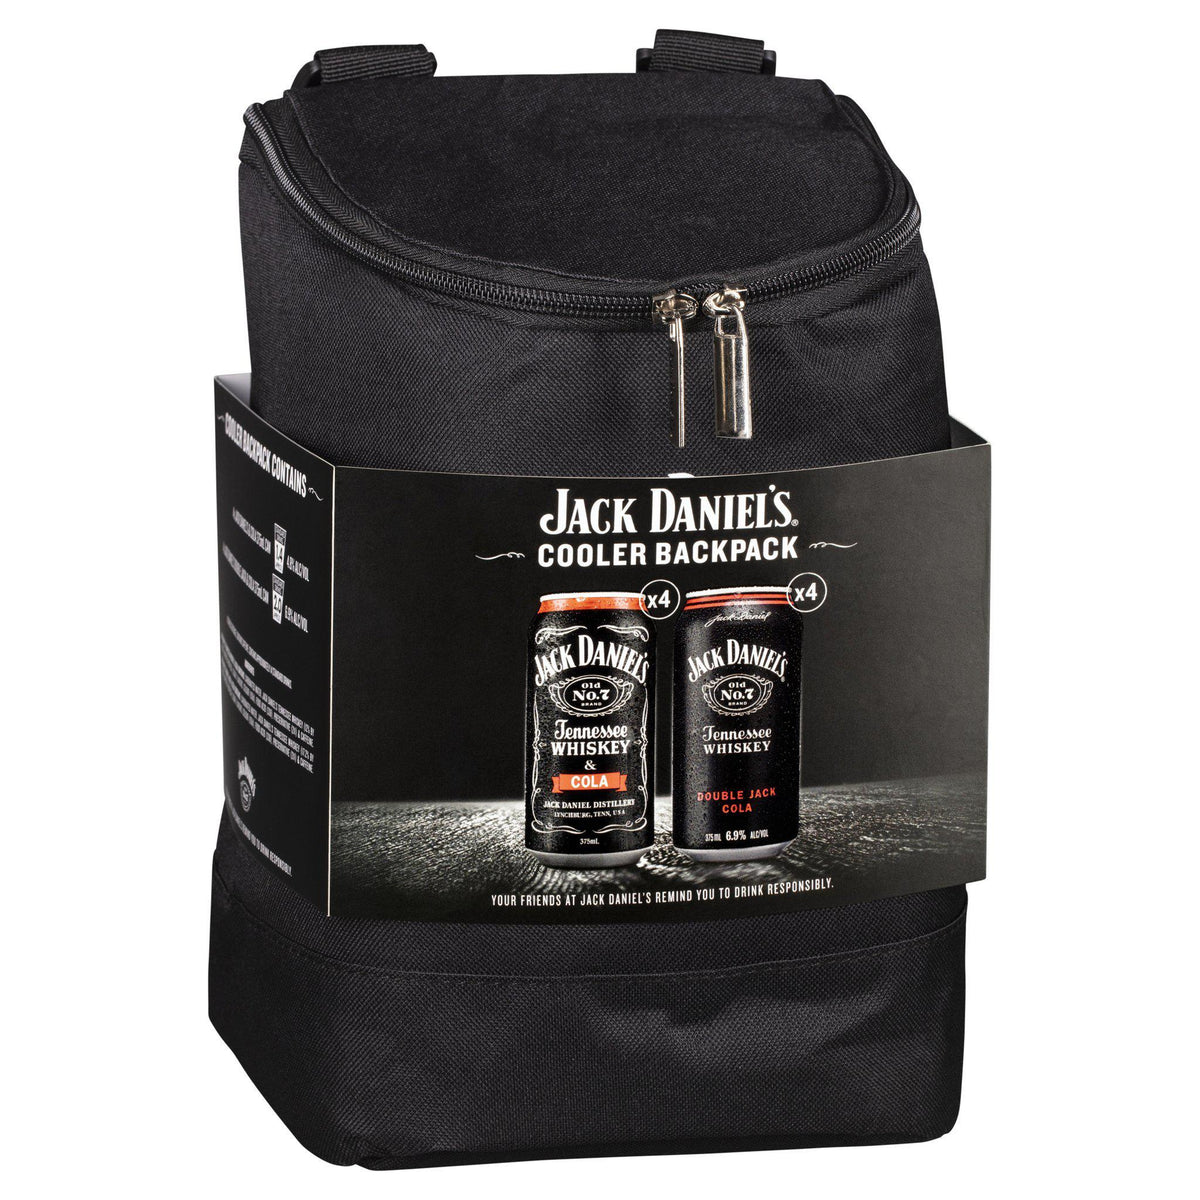 Jack Daniel's Limited Edition Cooler Backpack 8 Cans 375mL